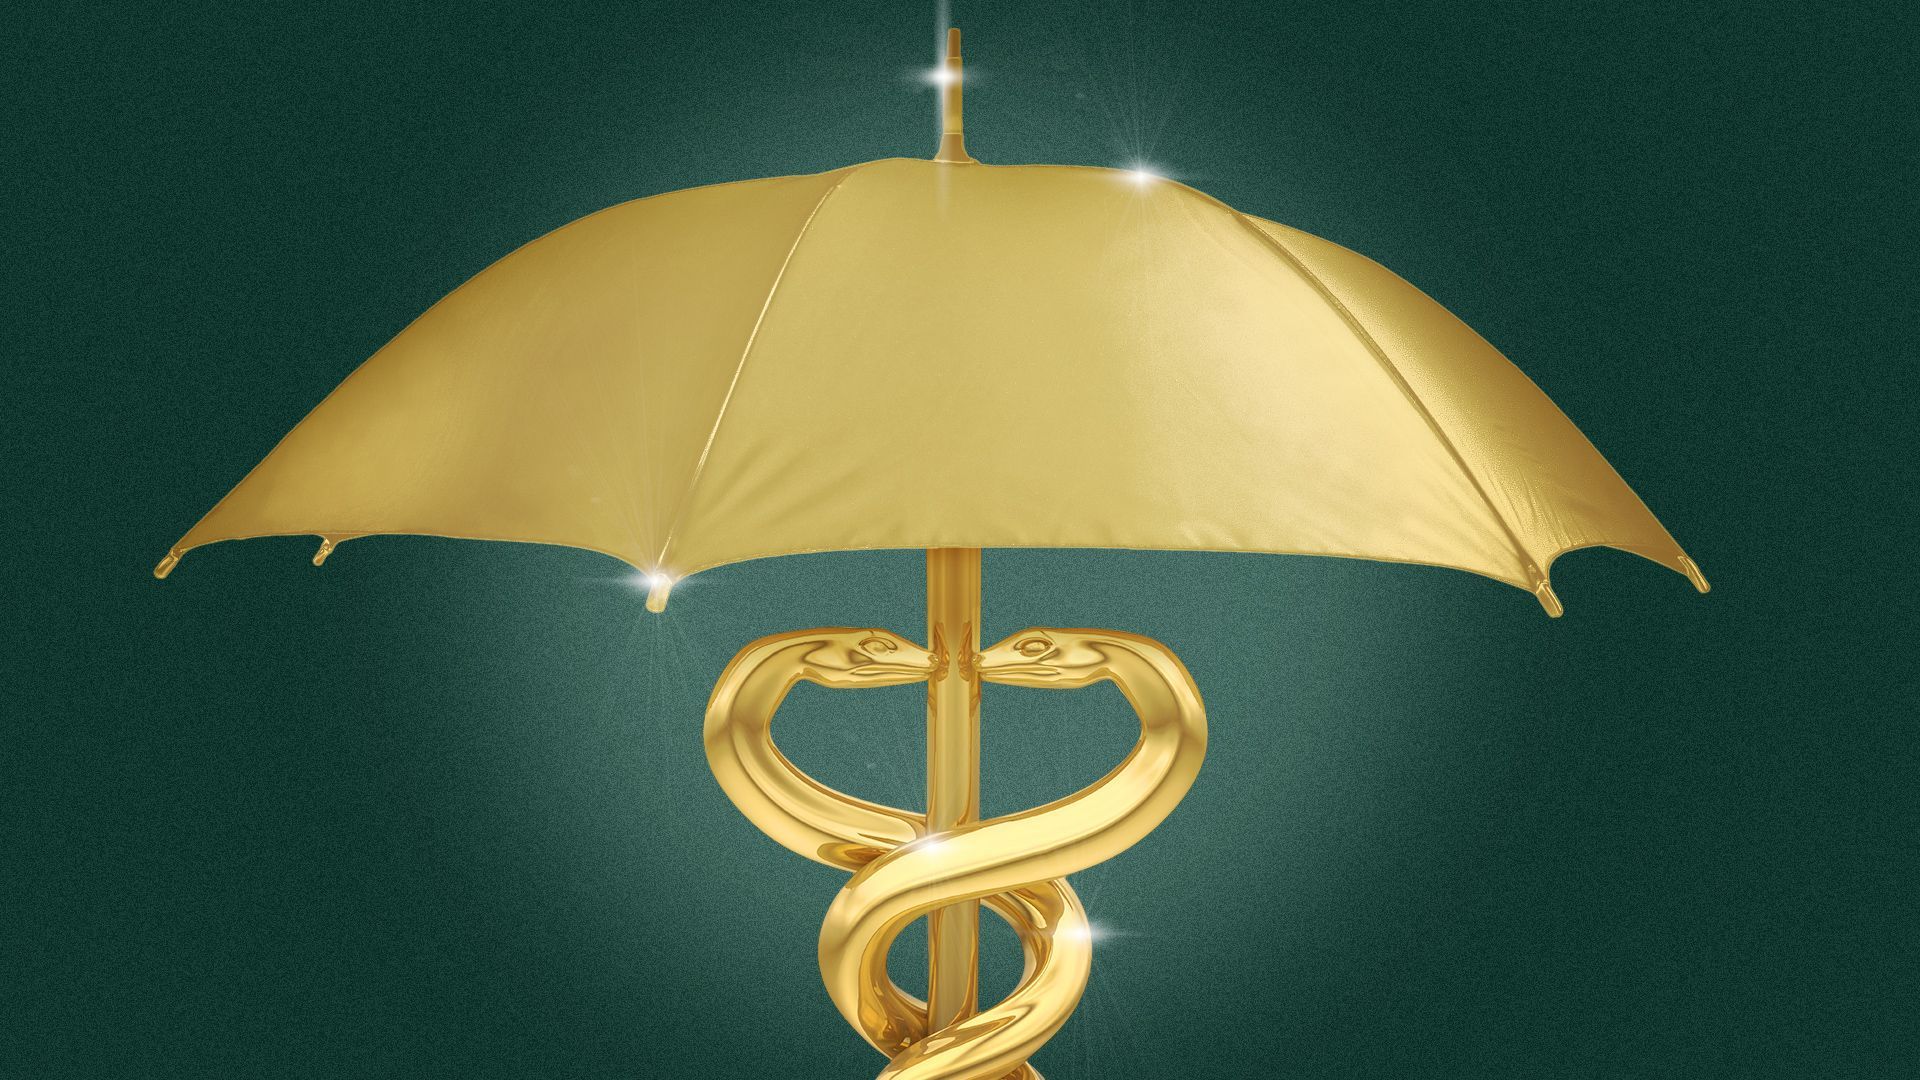 Illustration of an umbrella with a caduceus as the shaft. 